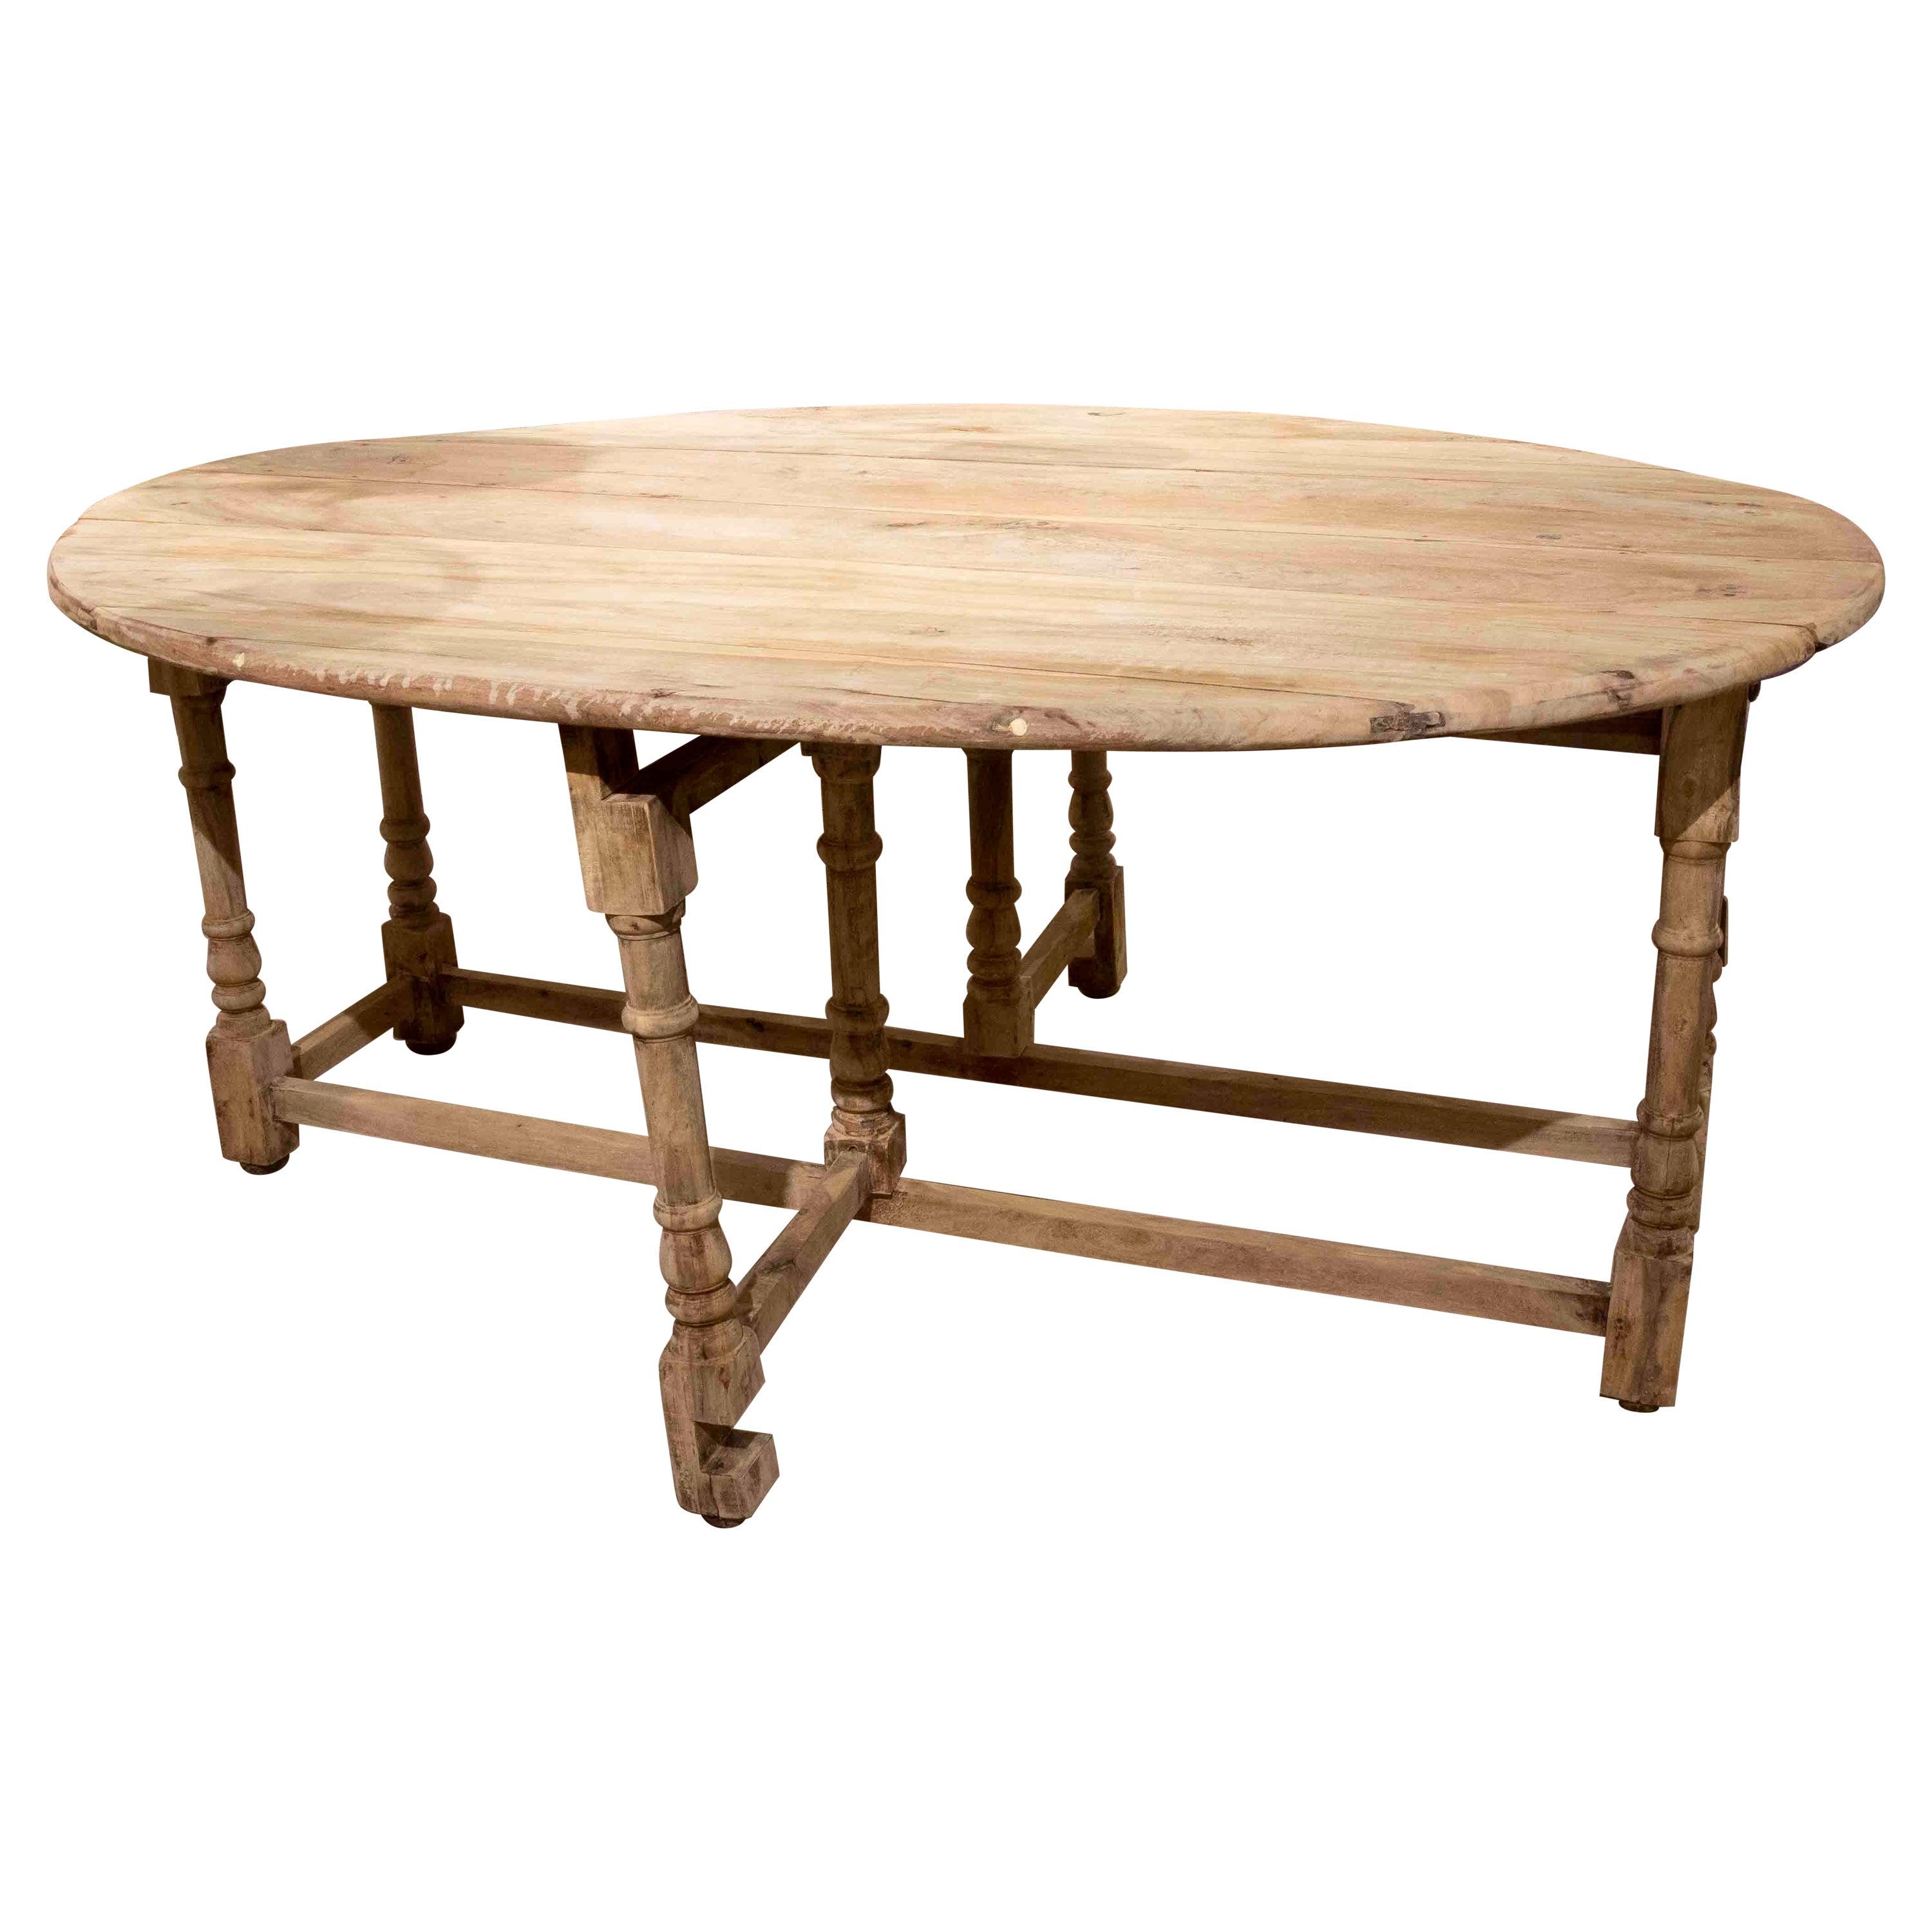 1950s Spanish Wooden Oval Wing Table with Turned Legs For Sale